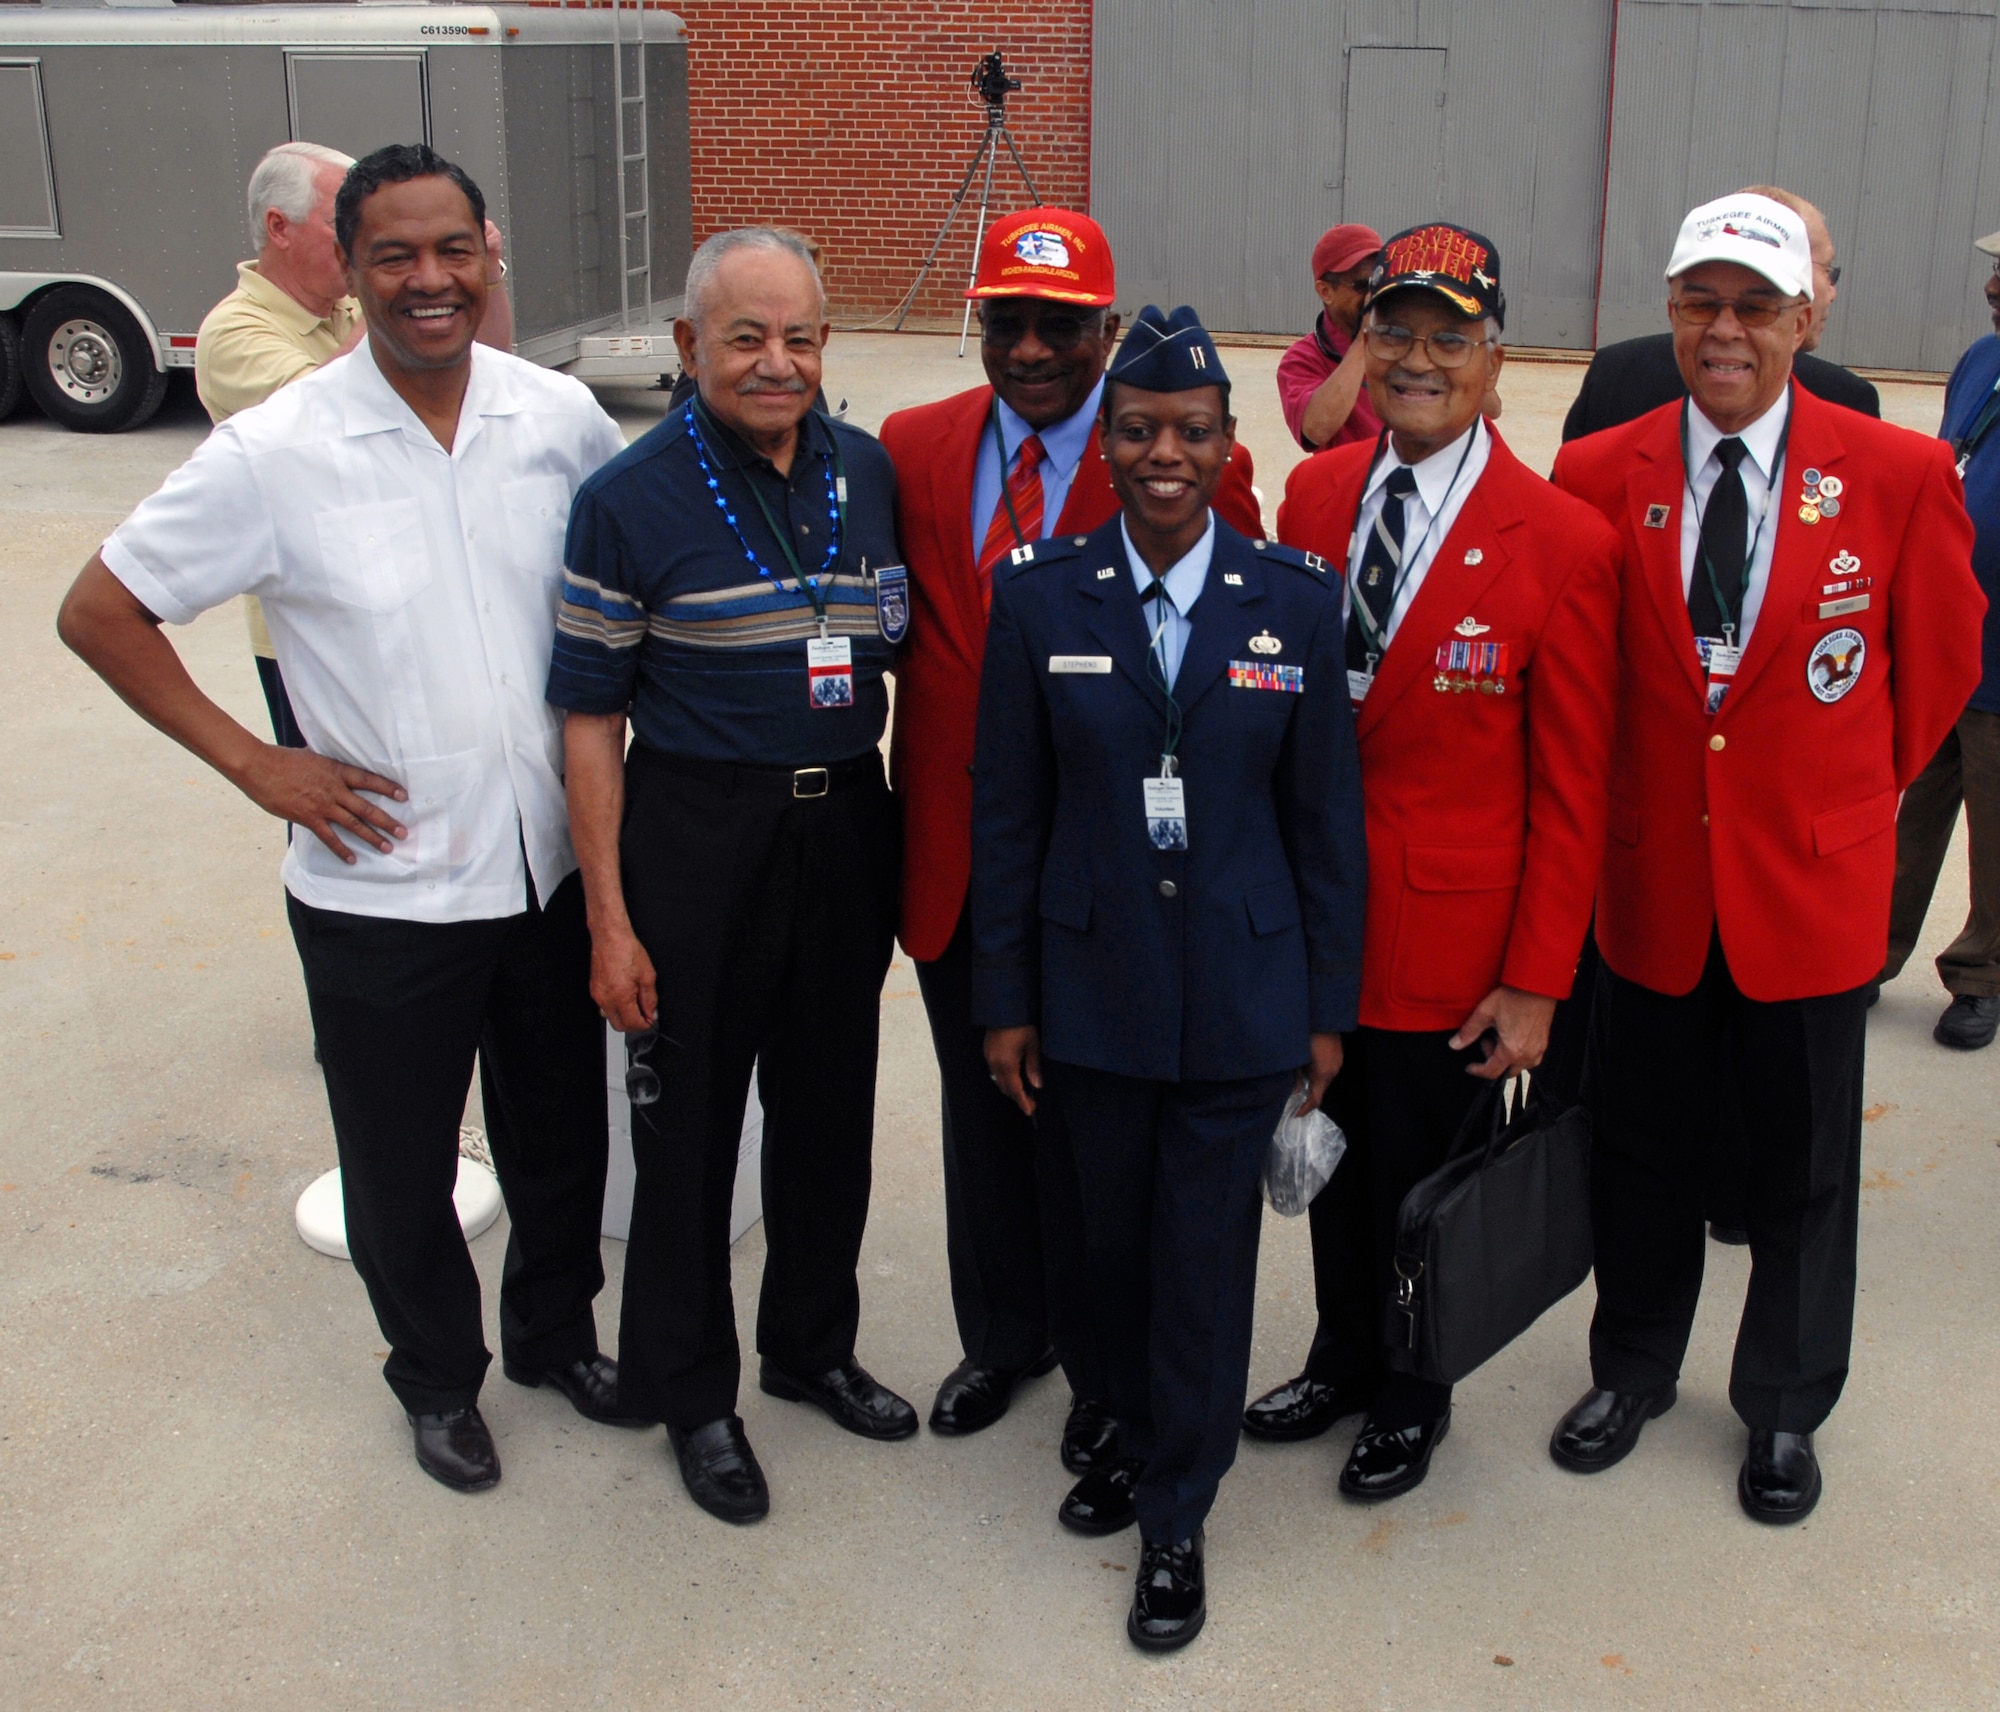 Capt. Tonia Stephens poses for a keepsake photo with a group of original Tuskegee Airmen and retired Air Force Col. R. J. Lewis, far left, before the opening ceremony of the Tuskegee Airmen National Historic Site Oct. 10 at Moton Field, Tuskegee, Ala. Captain Stephens is a member of the 908th Airlift Wing; Colonel Lewis is a second generation Tuskegee Airman and longtime airfield manager at Moton Field. (U.S. Air Force Photo by Lt. Col. Jerry Lobb)         